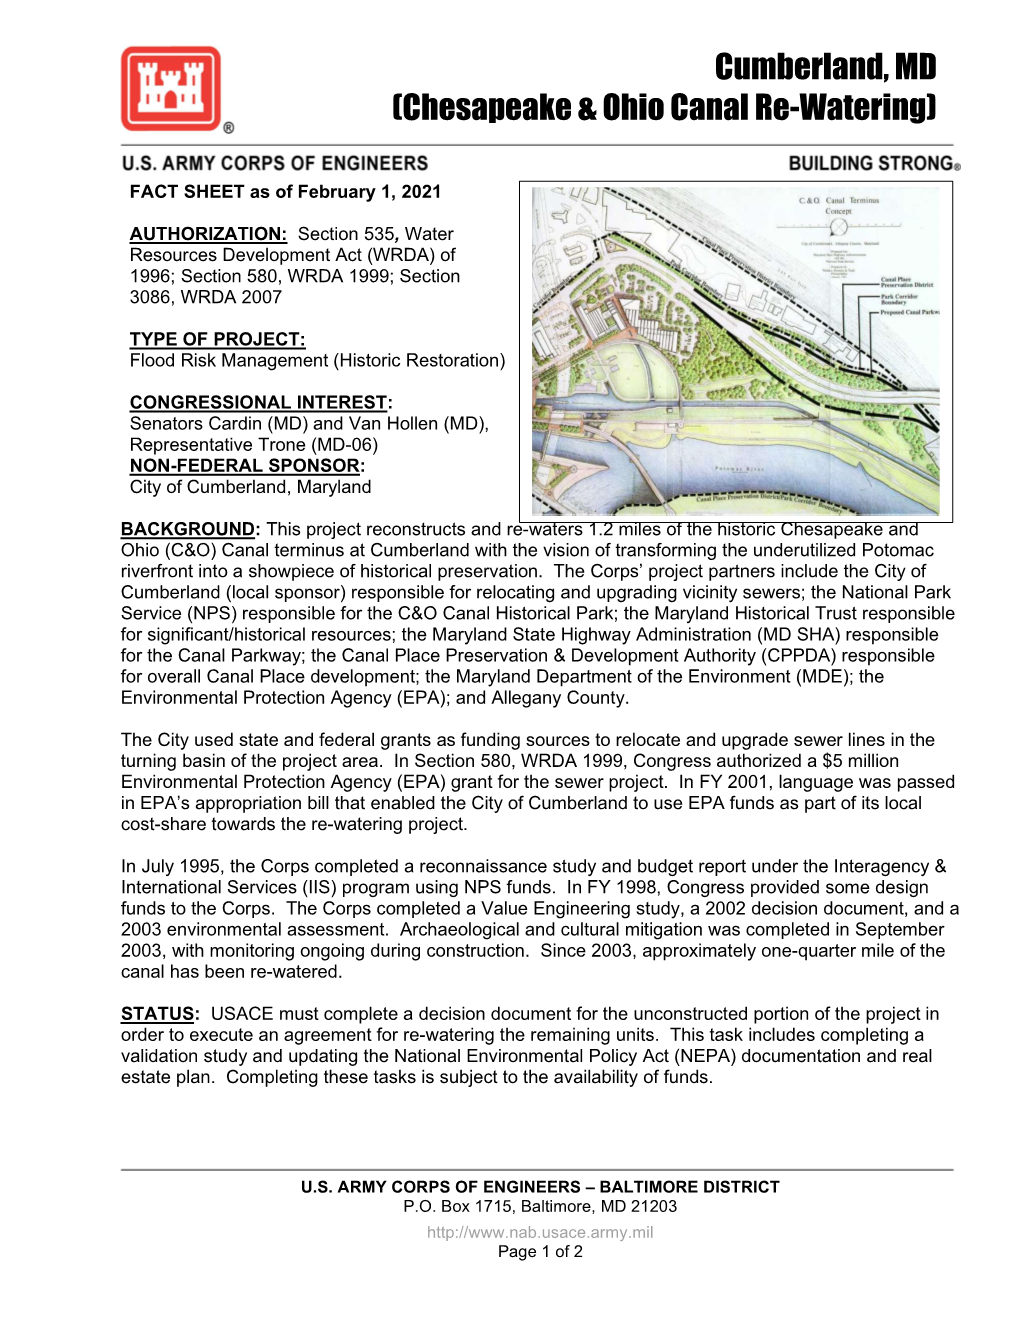 Chesapeake and Ohio Canal Rewatering Project Fact Sheet